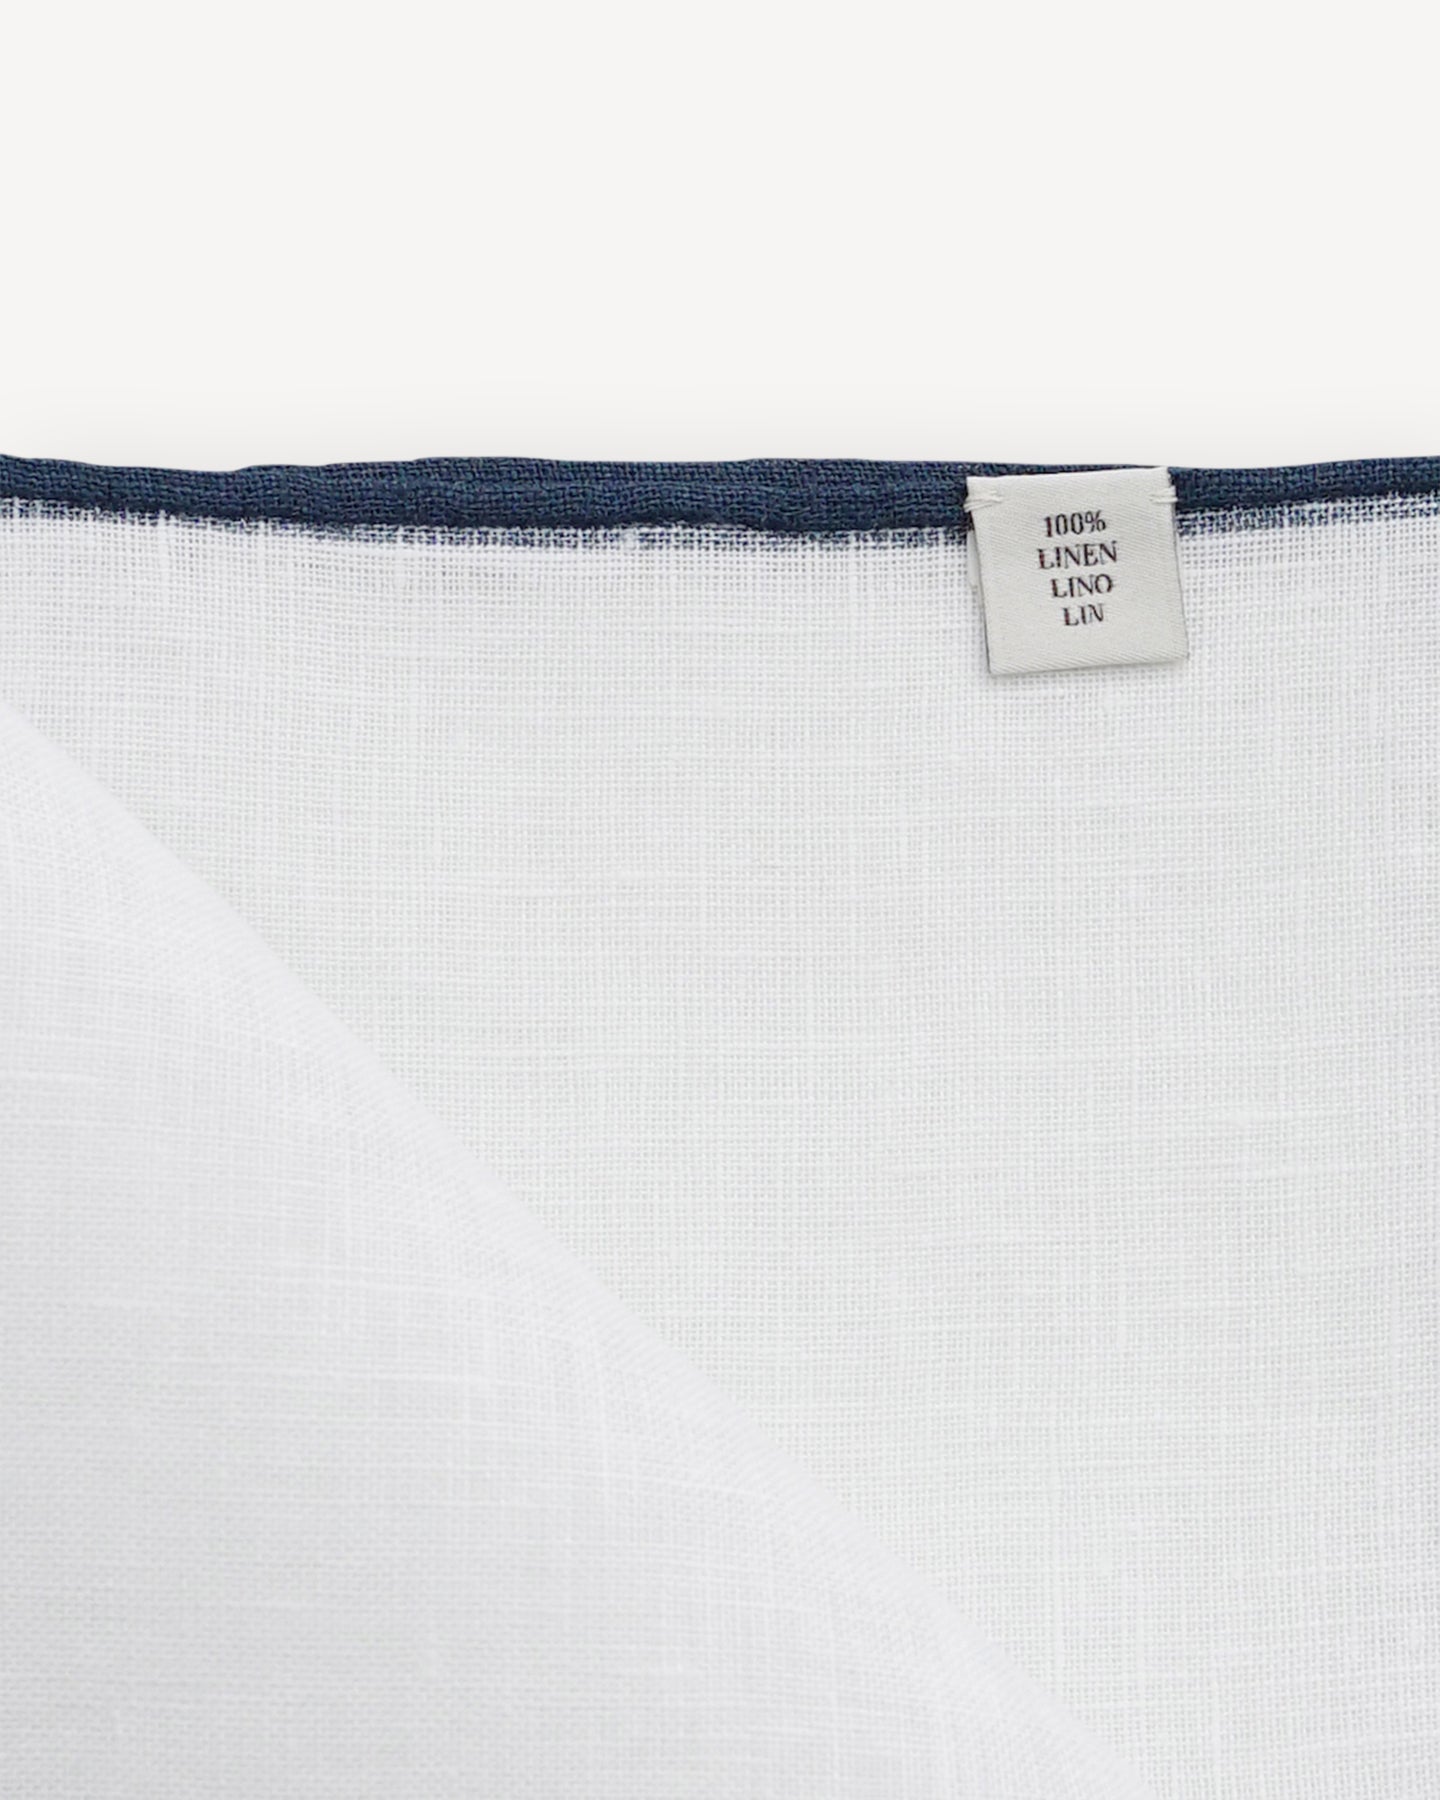 White linen pocket square with navy shoestring